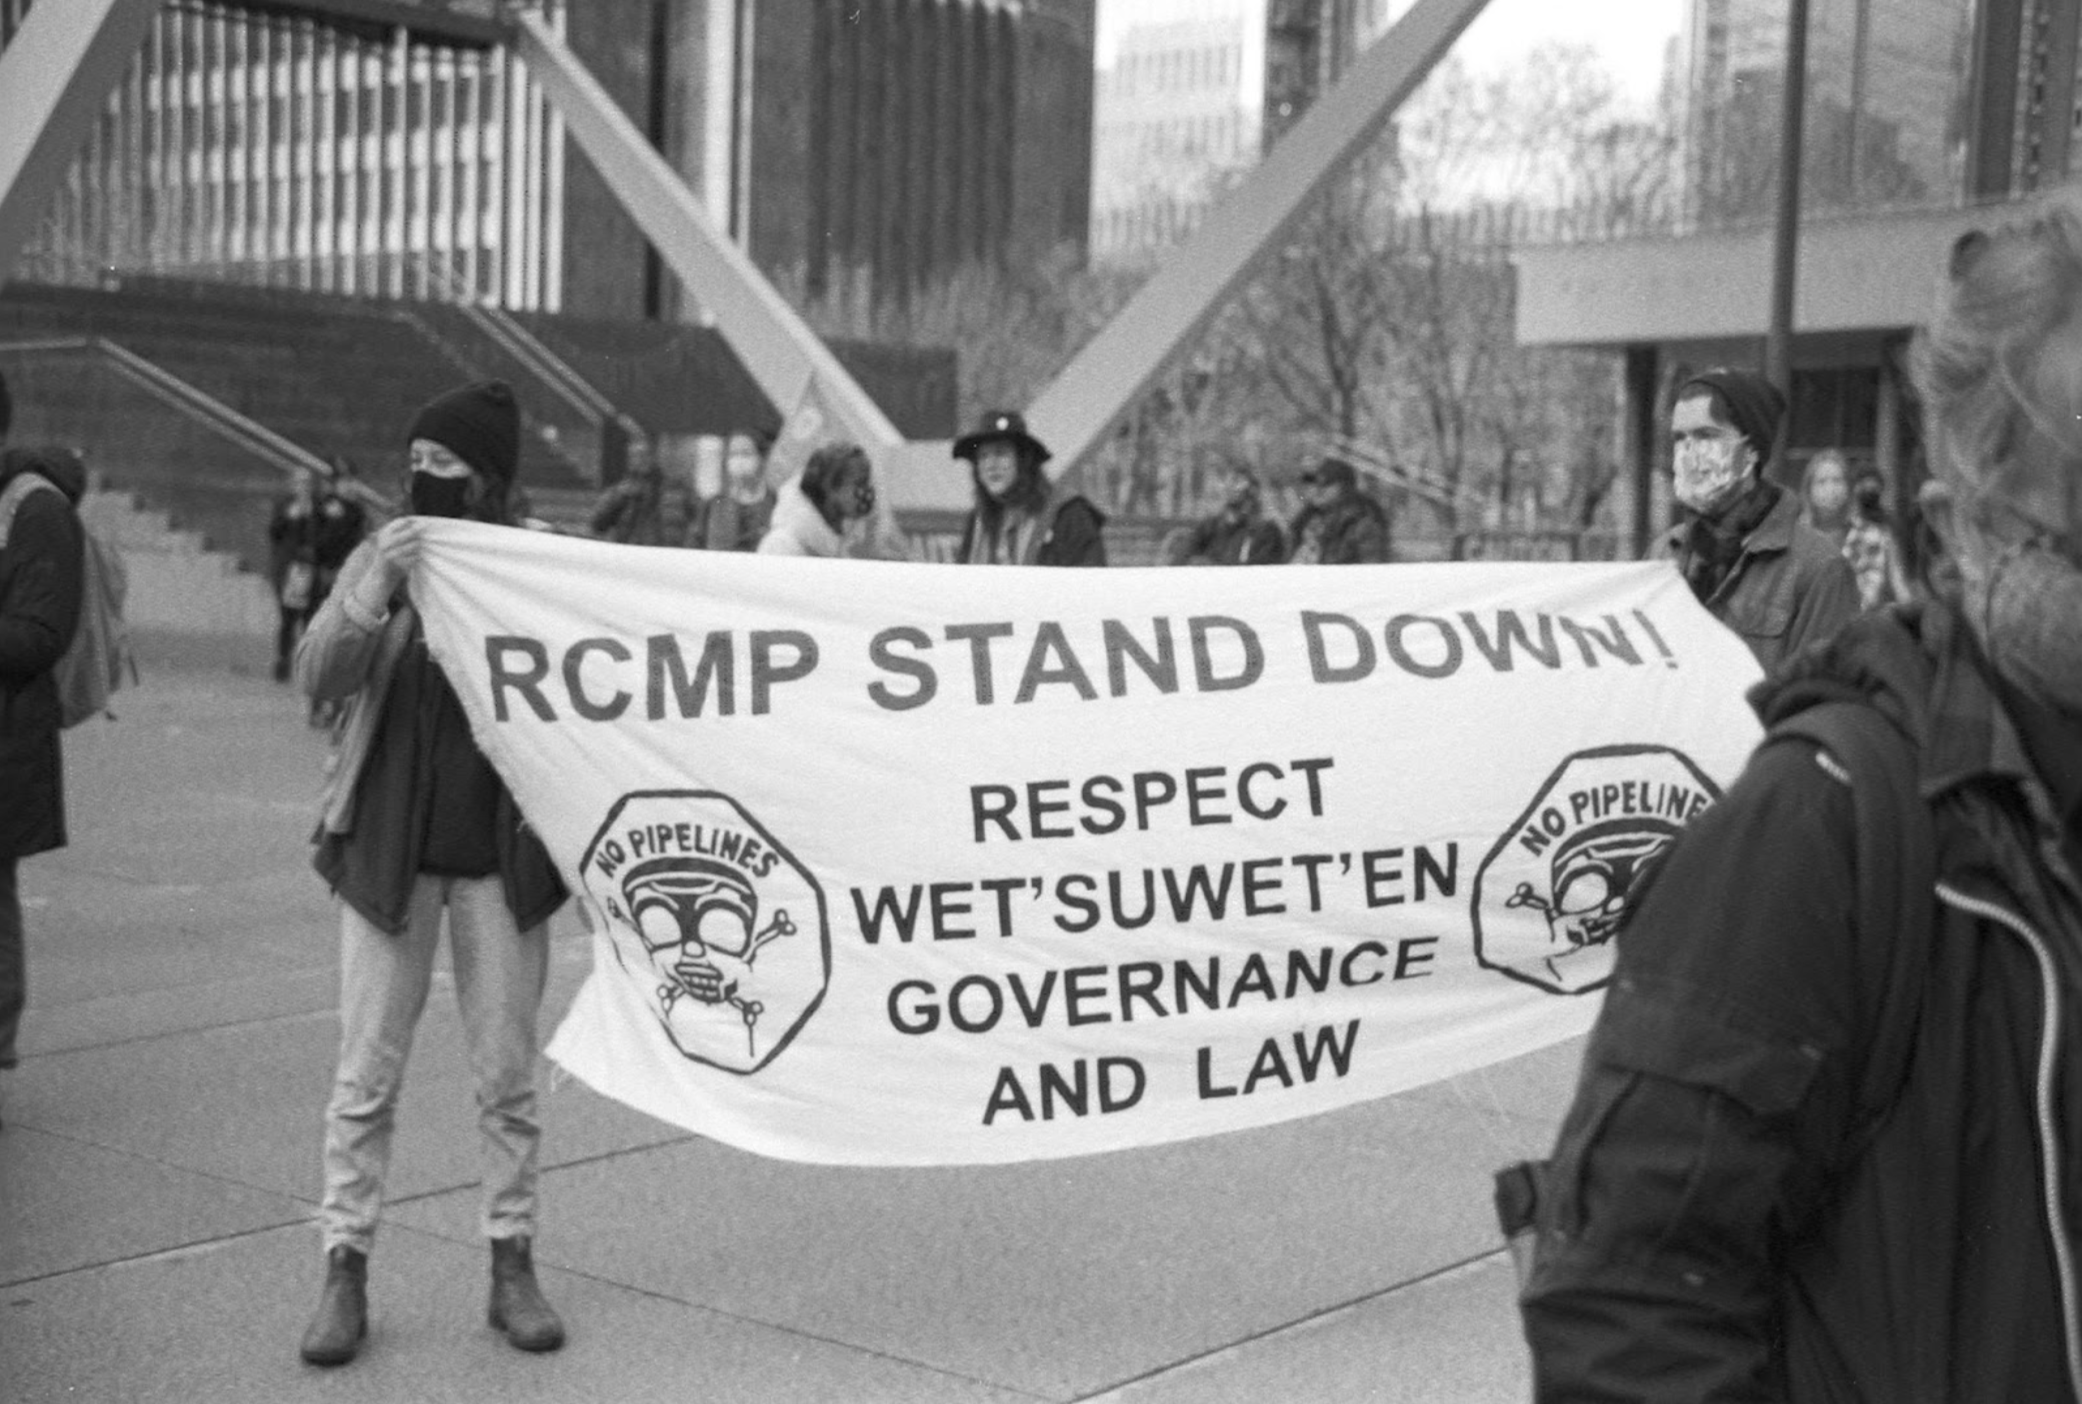 A black and white image of two people holding a large white banner. The banner reads "RCMP stand down! Respect Wet'suwet'en governance and law" in large capital letters. Behind them you can see an urban landscape.